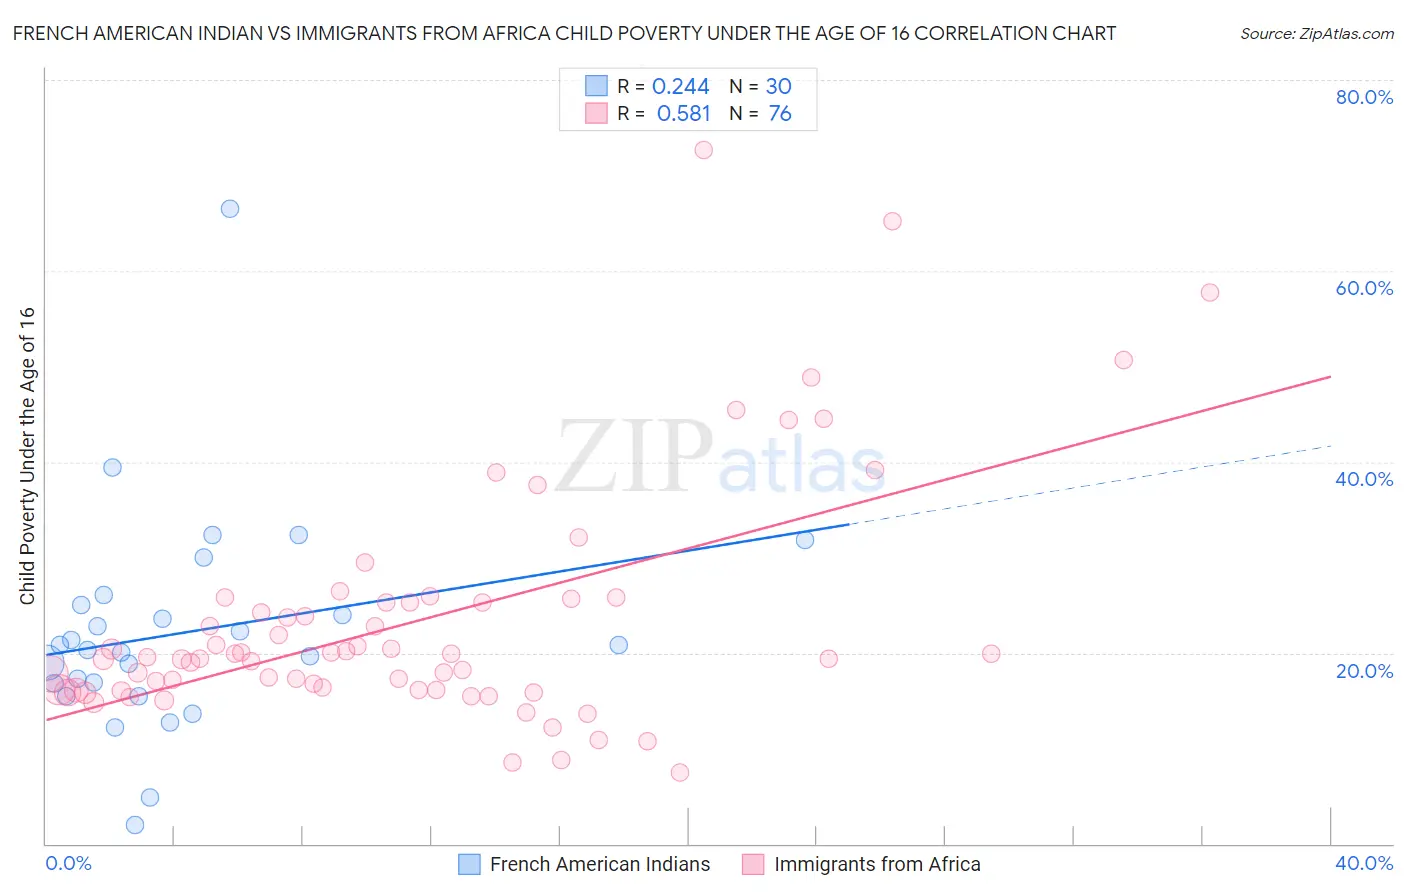 French American Indian vs Immigrants from Africa Child Poverty Under the Age of 16